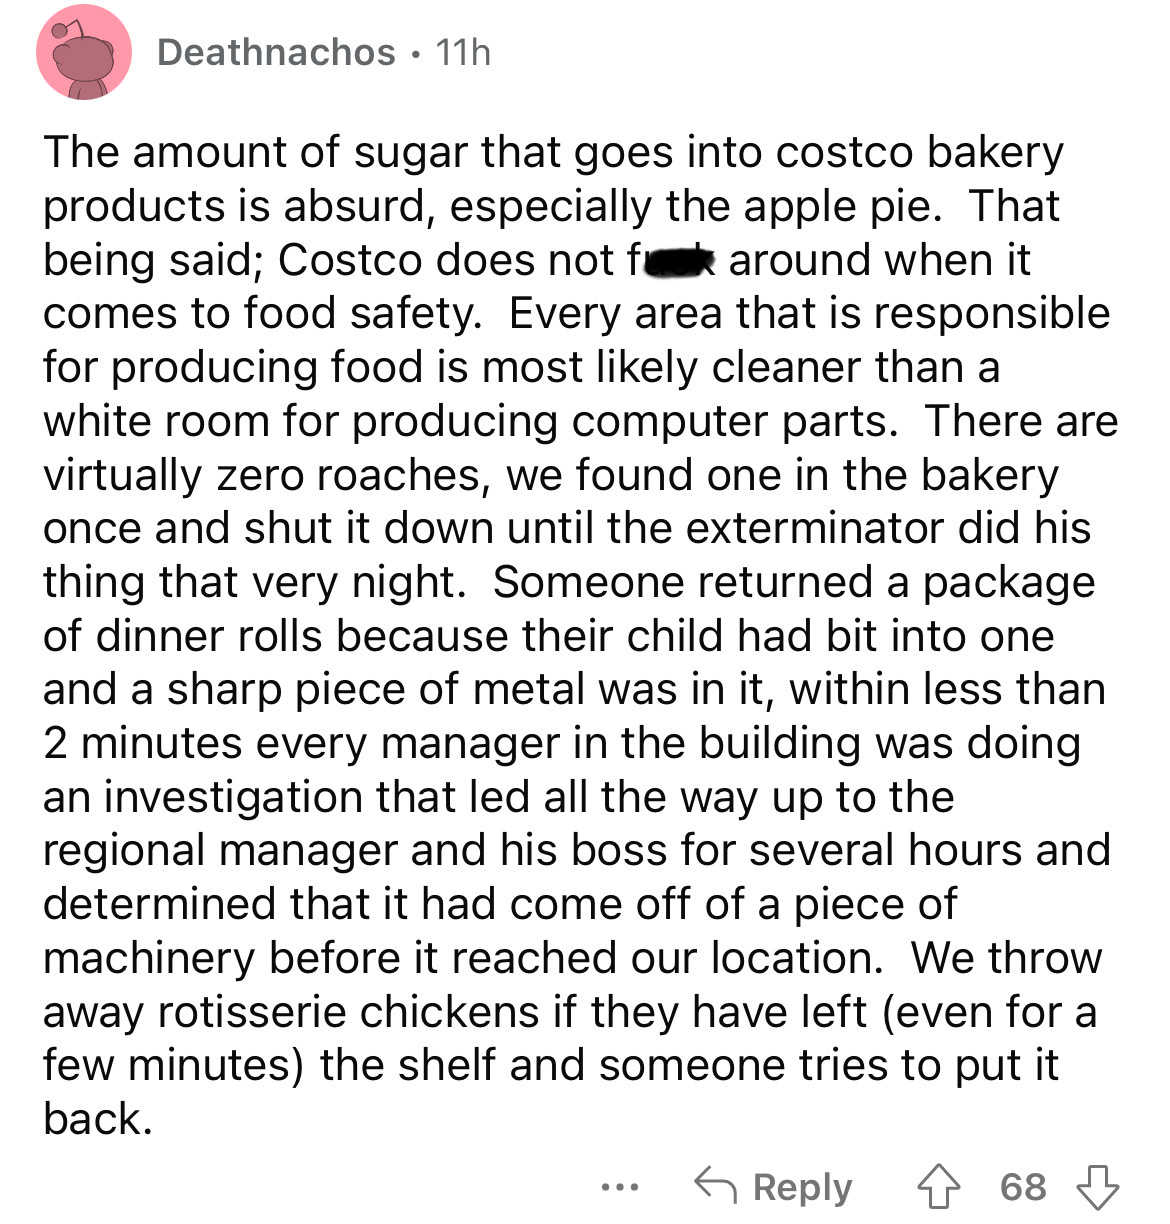 document - Deathnachos 11h The amount of sugar that goes into costco bakery products is absurd, especially the apple pie. That being said; Costco does not f around when it comes to food safety. Every area that is responsible for producing food is most ly 